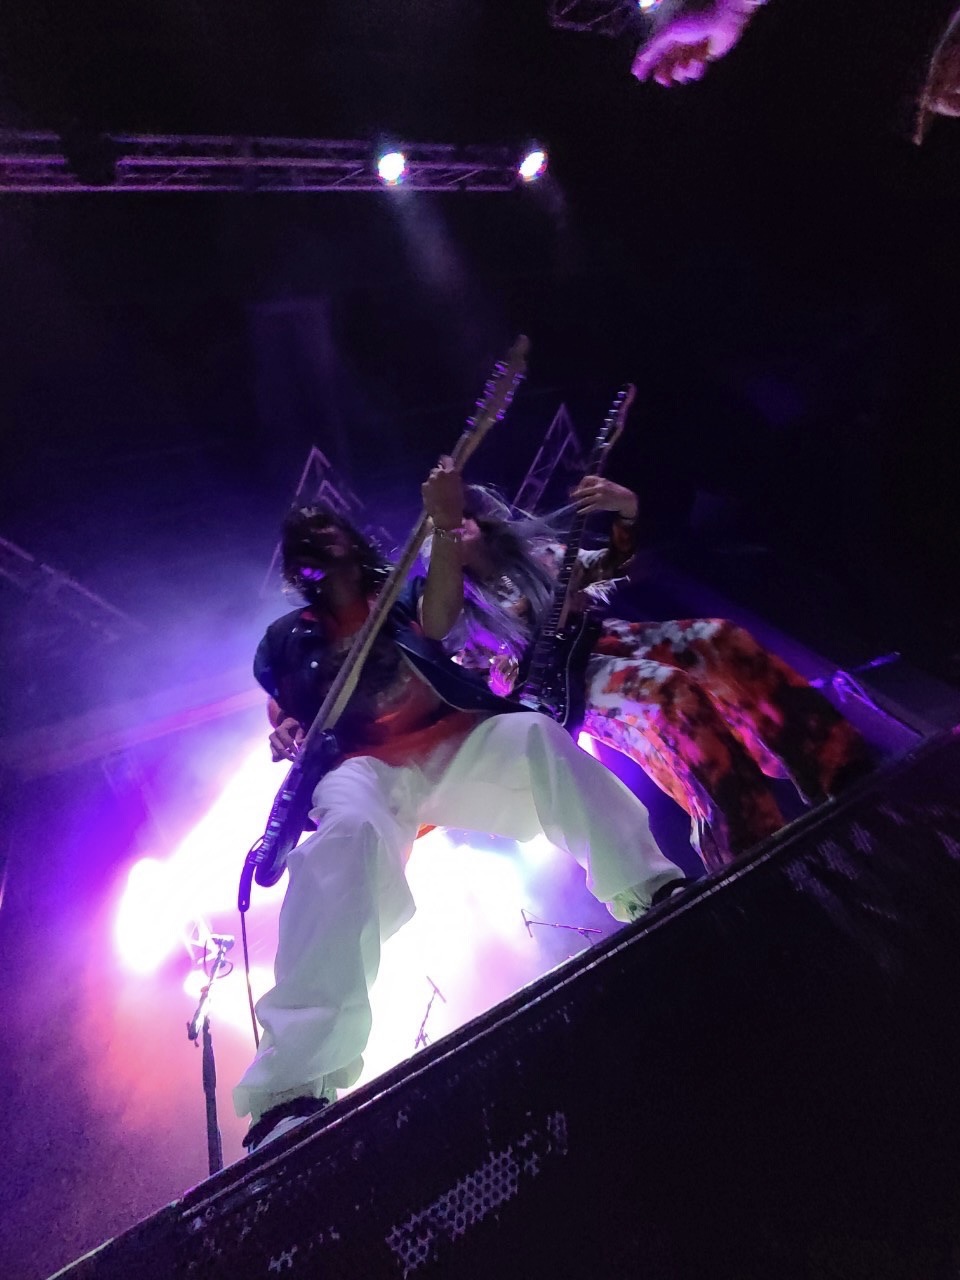 ASTERISM in New York City. Pictured from left to right: MIYU and HAL-CA. Photo provided by Sony Music Entertainment Japan (SMEJ)